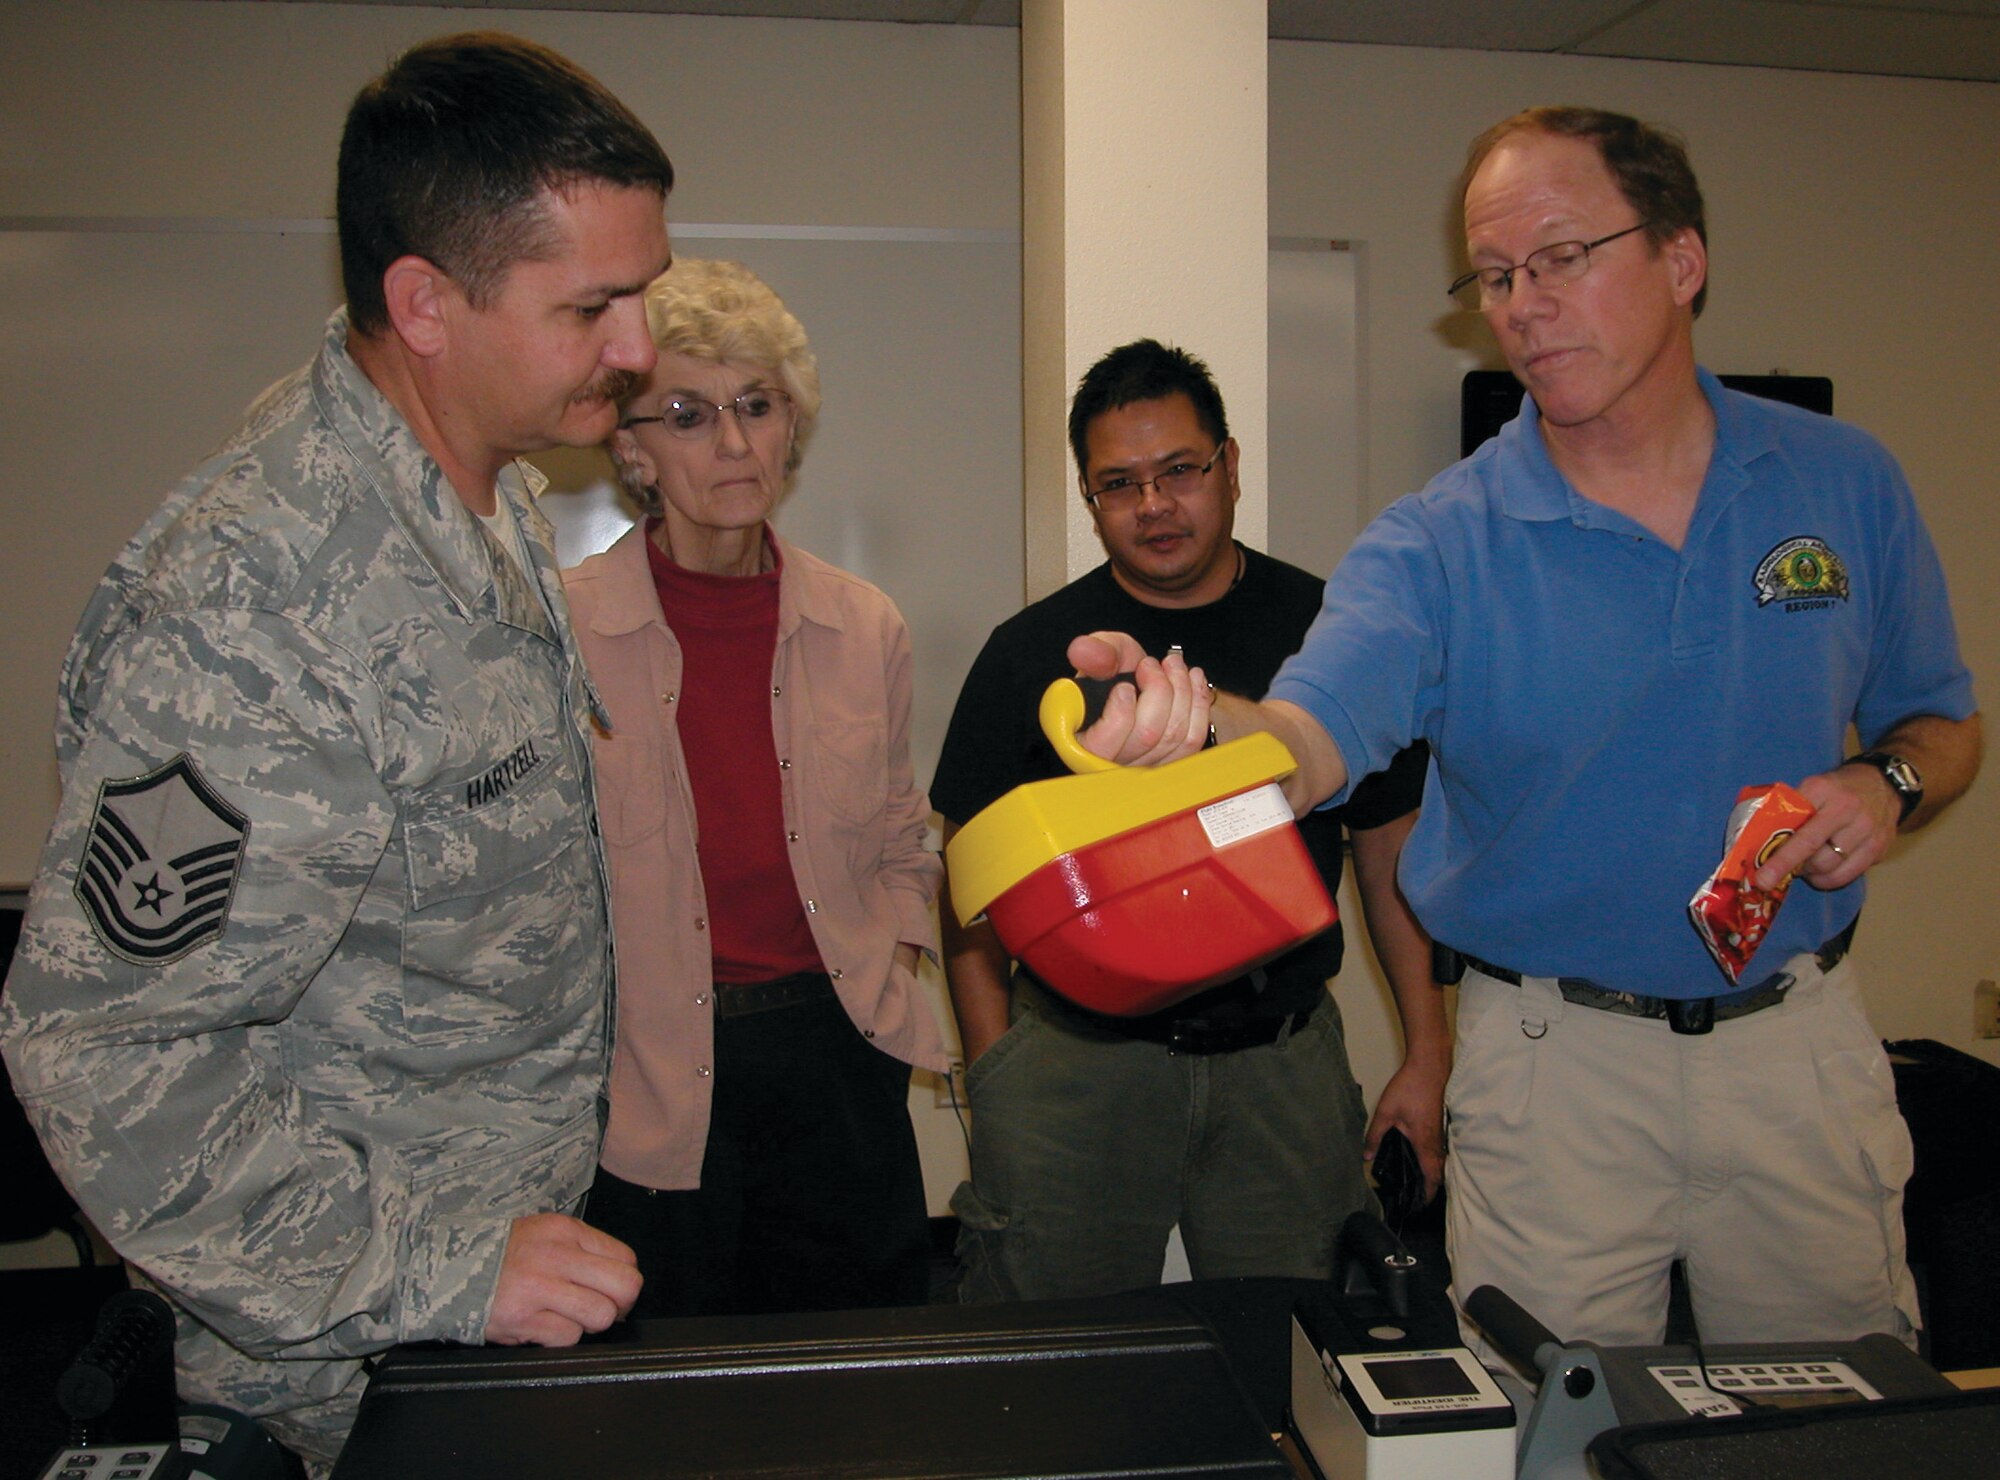 (from left) Master Sgt. Phillip Hartzell, Nancy Driscoll, Edward Crisostomo and Joel Swanson discuss a radiological detection device during a break in the presentation Swanson recently was giving on base. Swanson is a contractor response coordinator for the U.S. Department of Energy’s Region 7, which includes all of California. March ARB first and emergency responders attended the session, which promoted interagency cooperation. (U.S. Air Force photo by Megan Just)